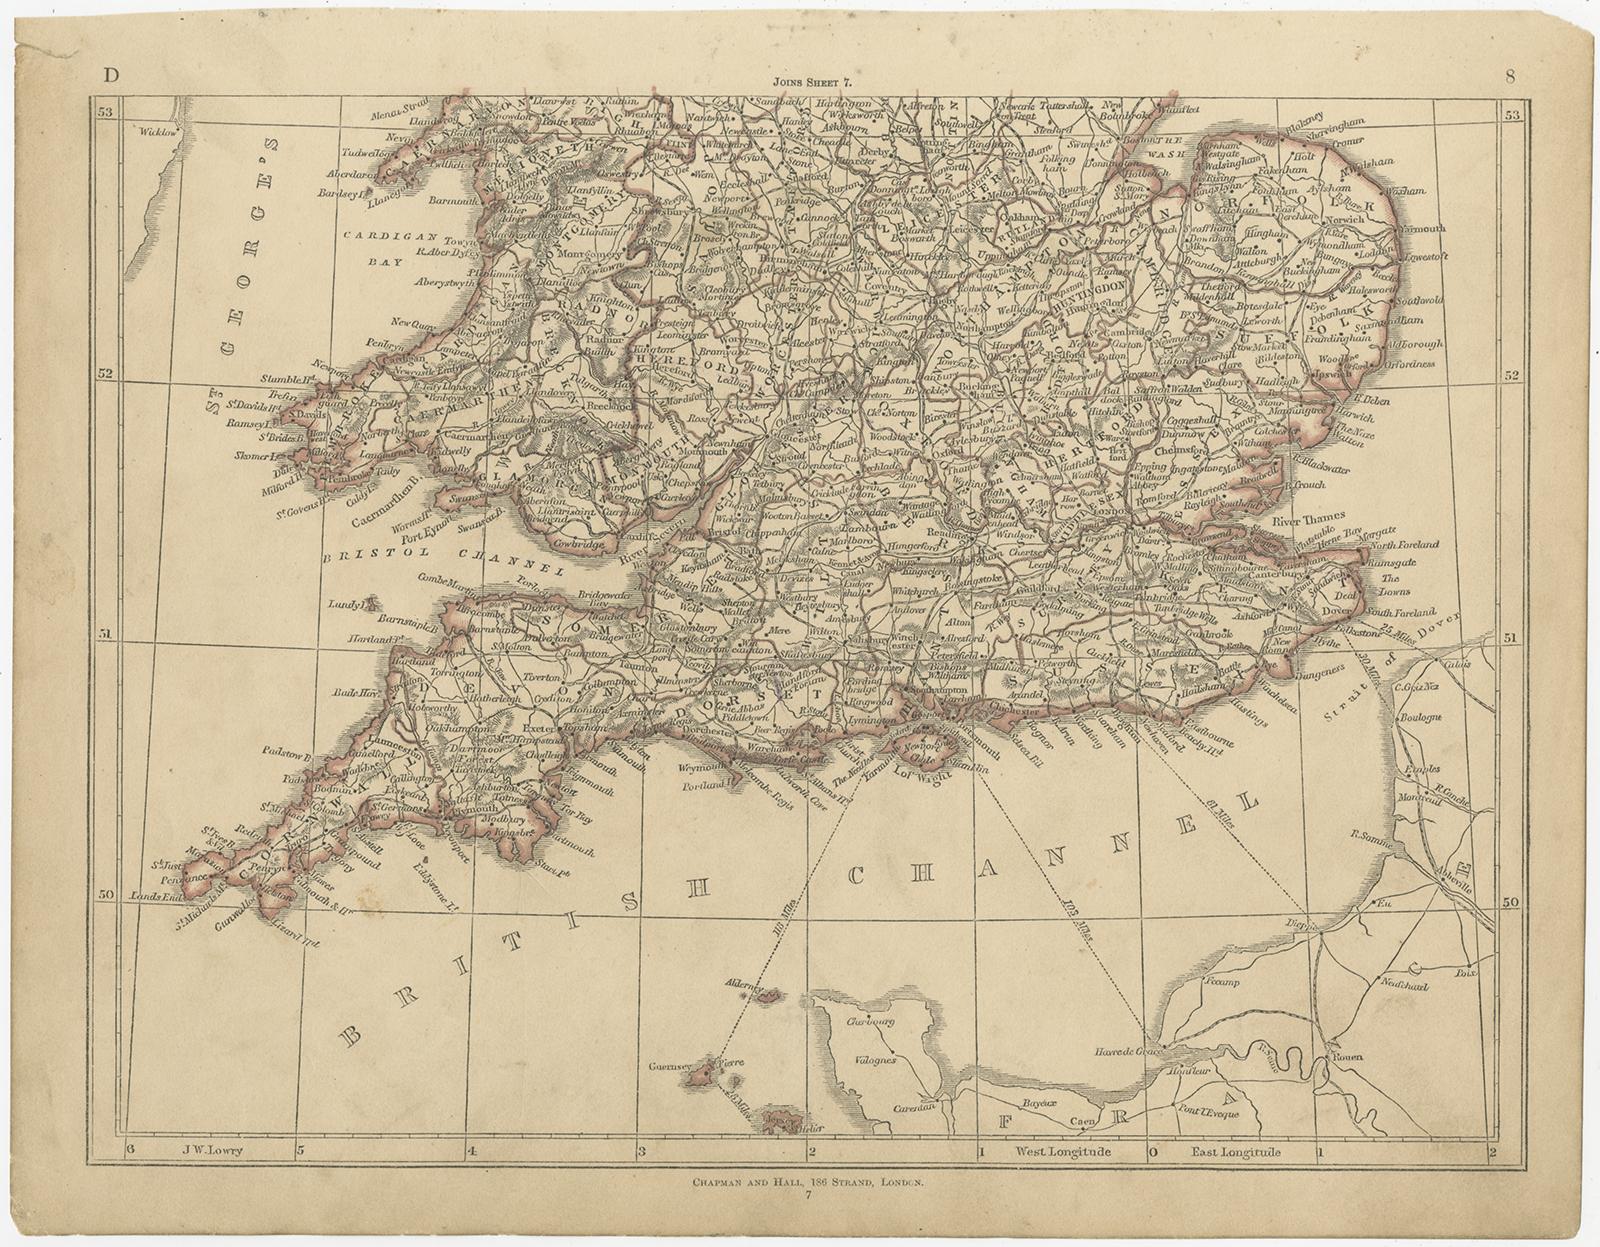 Antique map titled 'England and Wales'. Two individual sheets of England and Wales. This map originates from 'Lowry's Table Atlas constructed and engraved from the most recent Authorities' by J.W. Lowry. Published 1852.